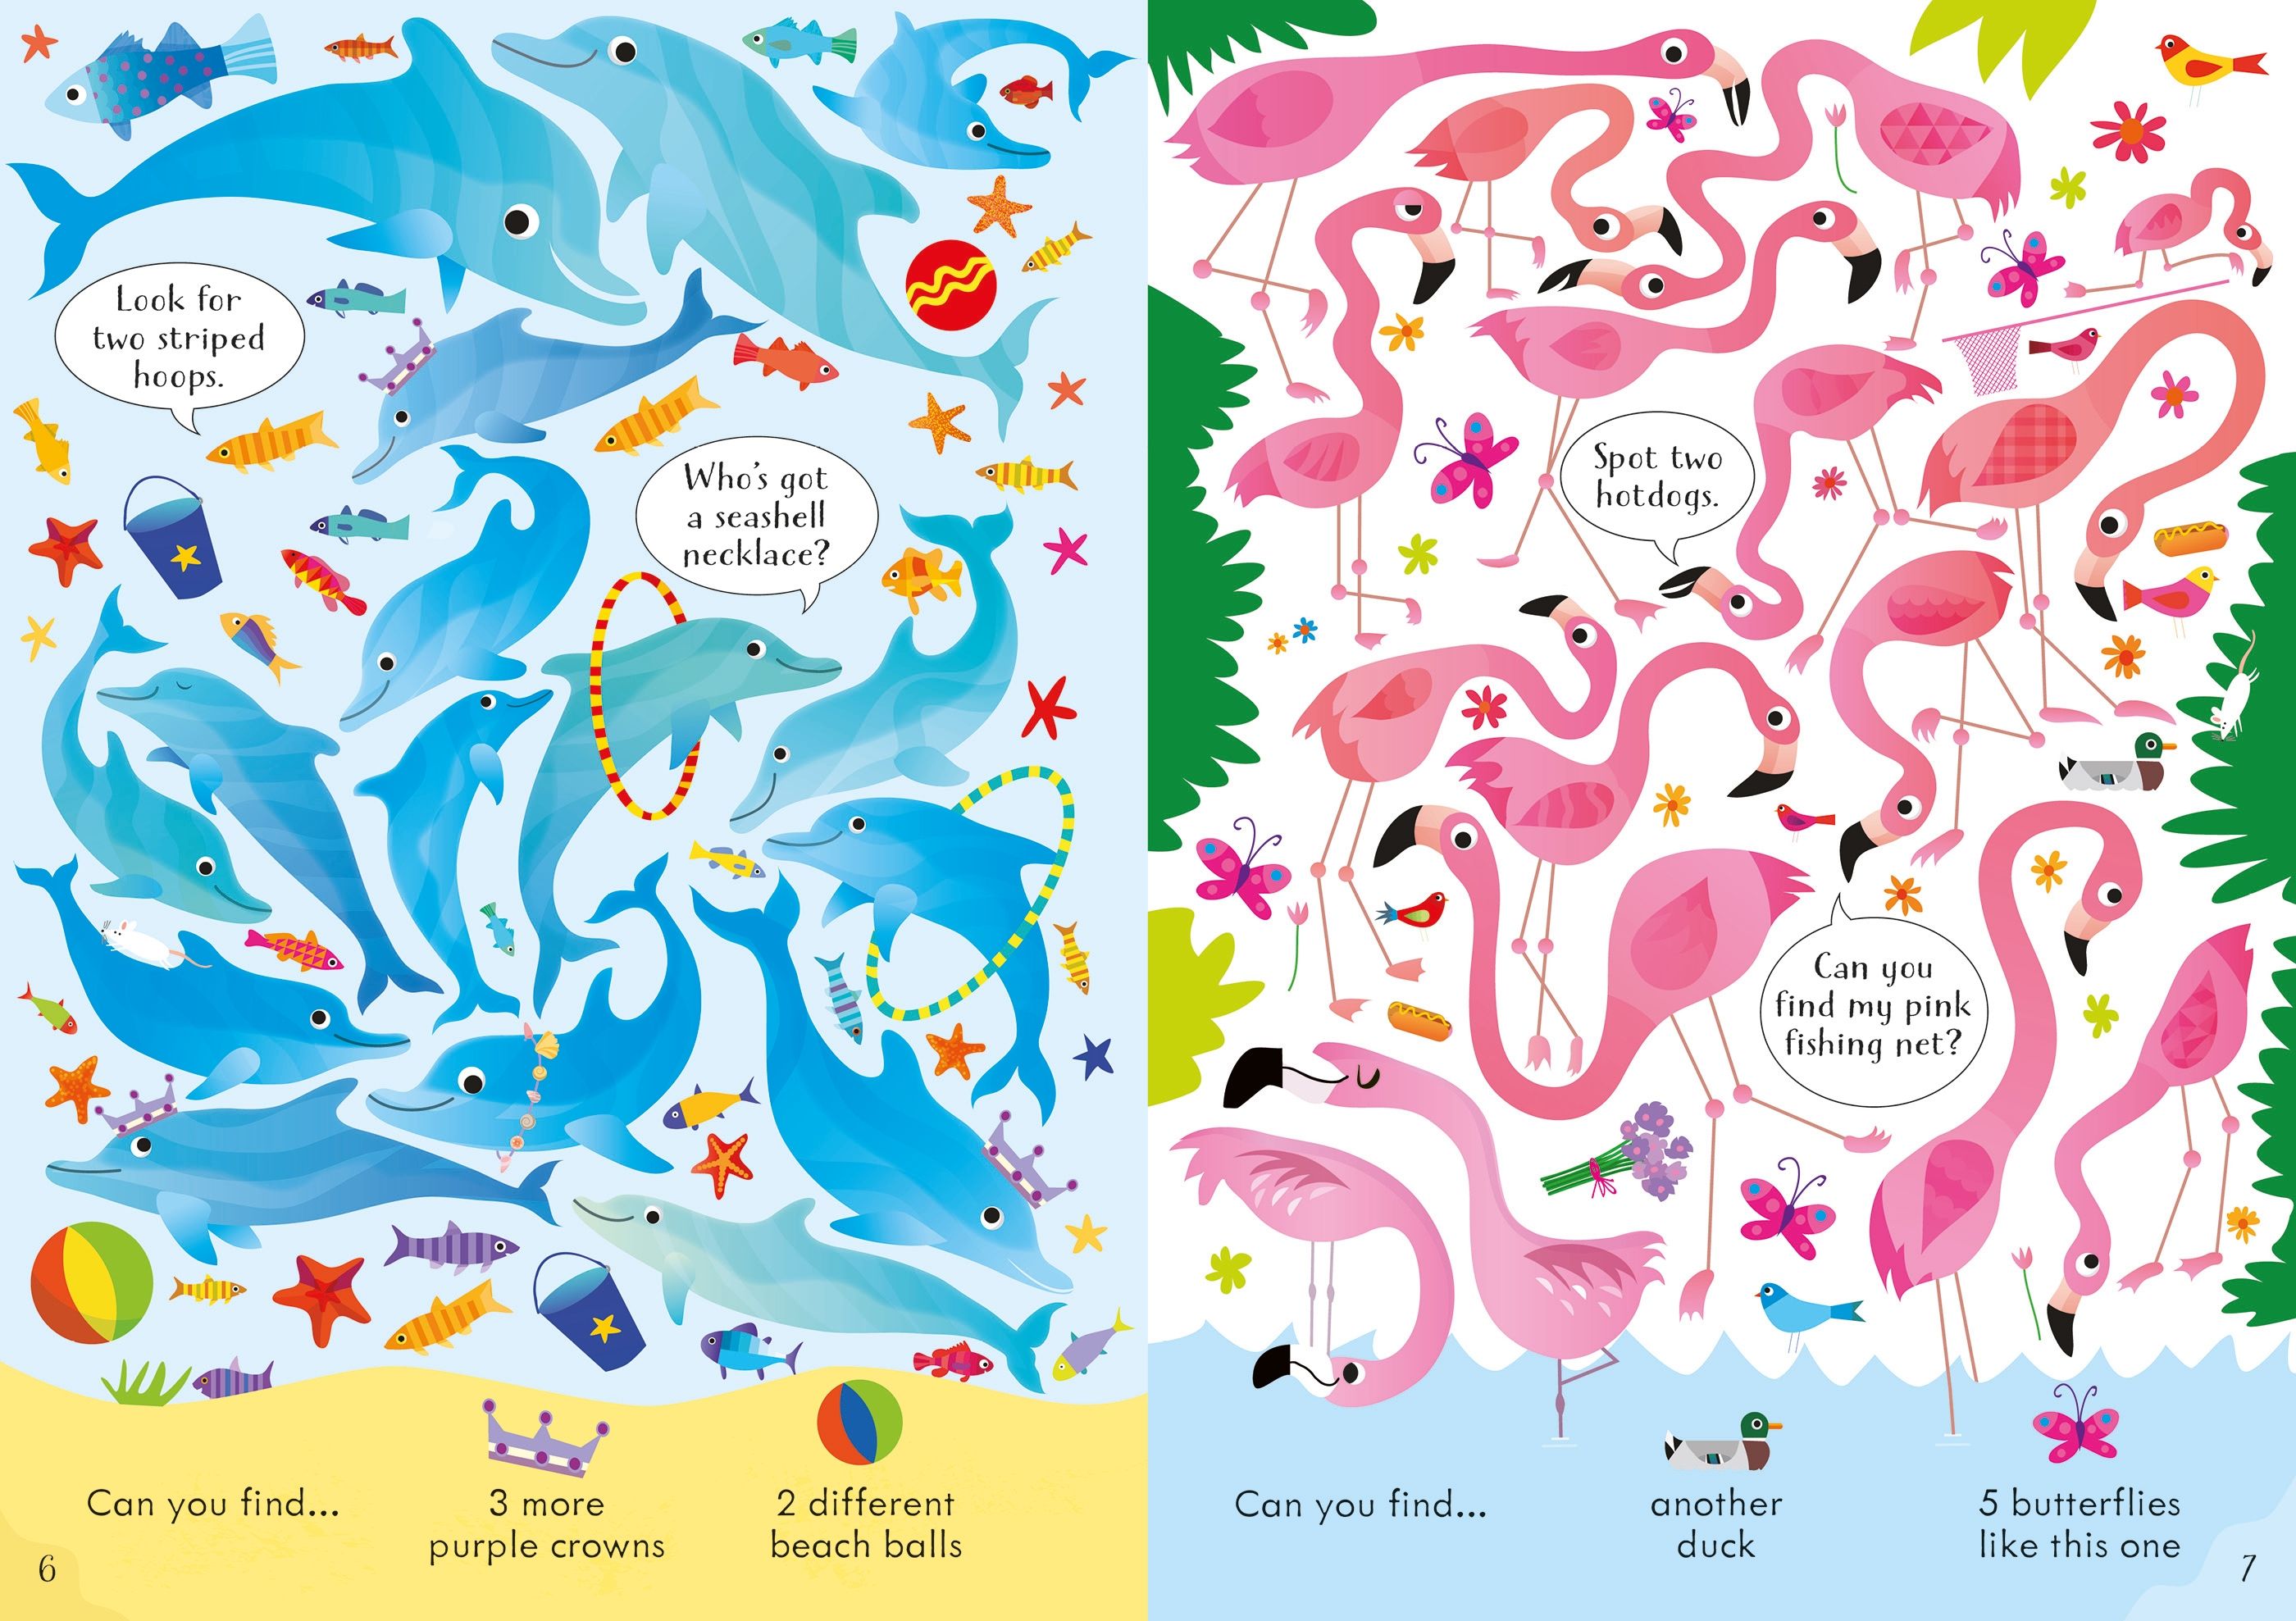 Usborne Books | Look and Find Puzzles - At the Zoo